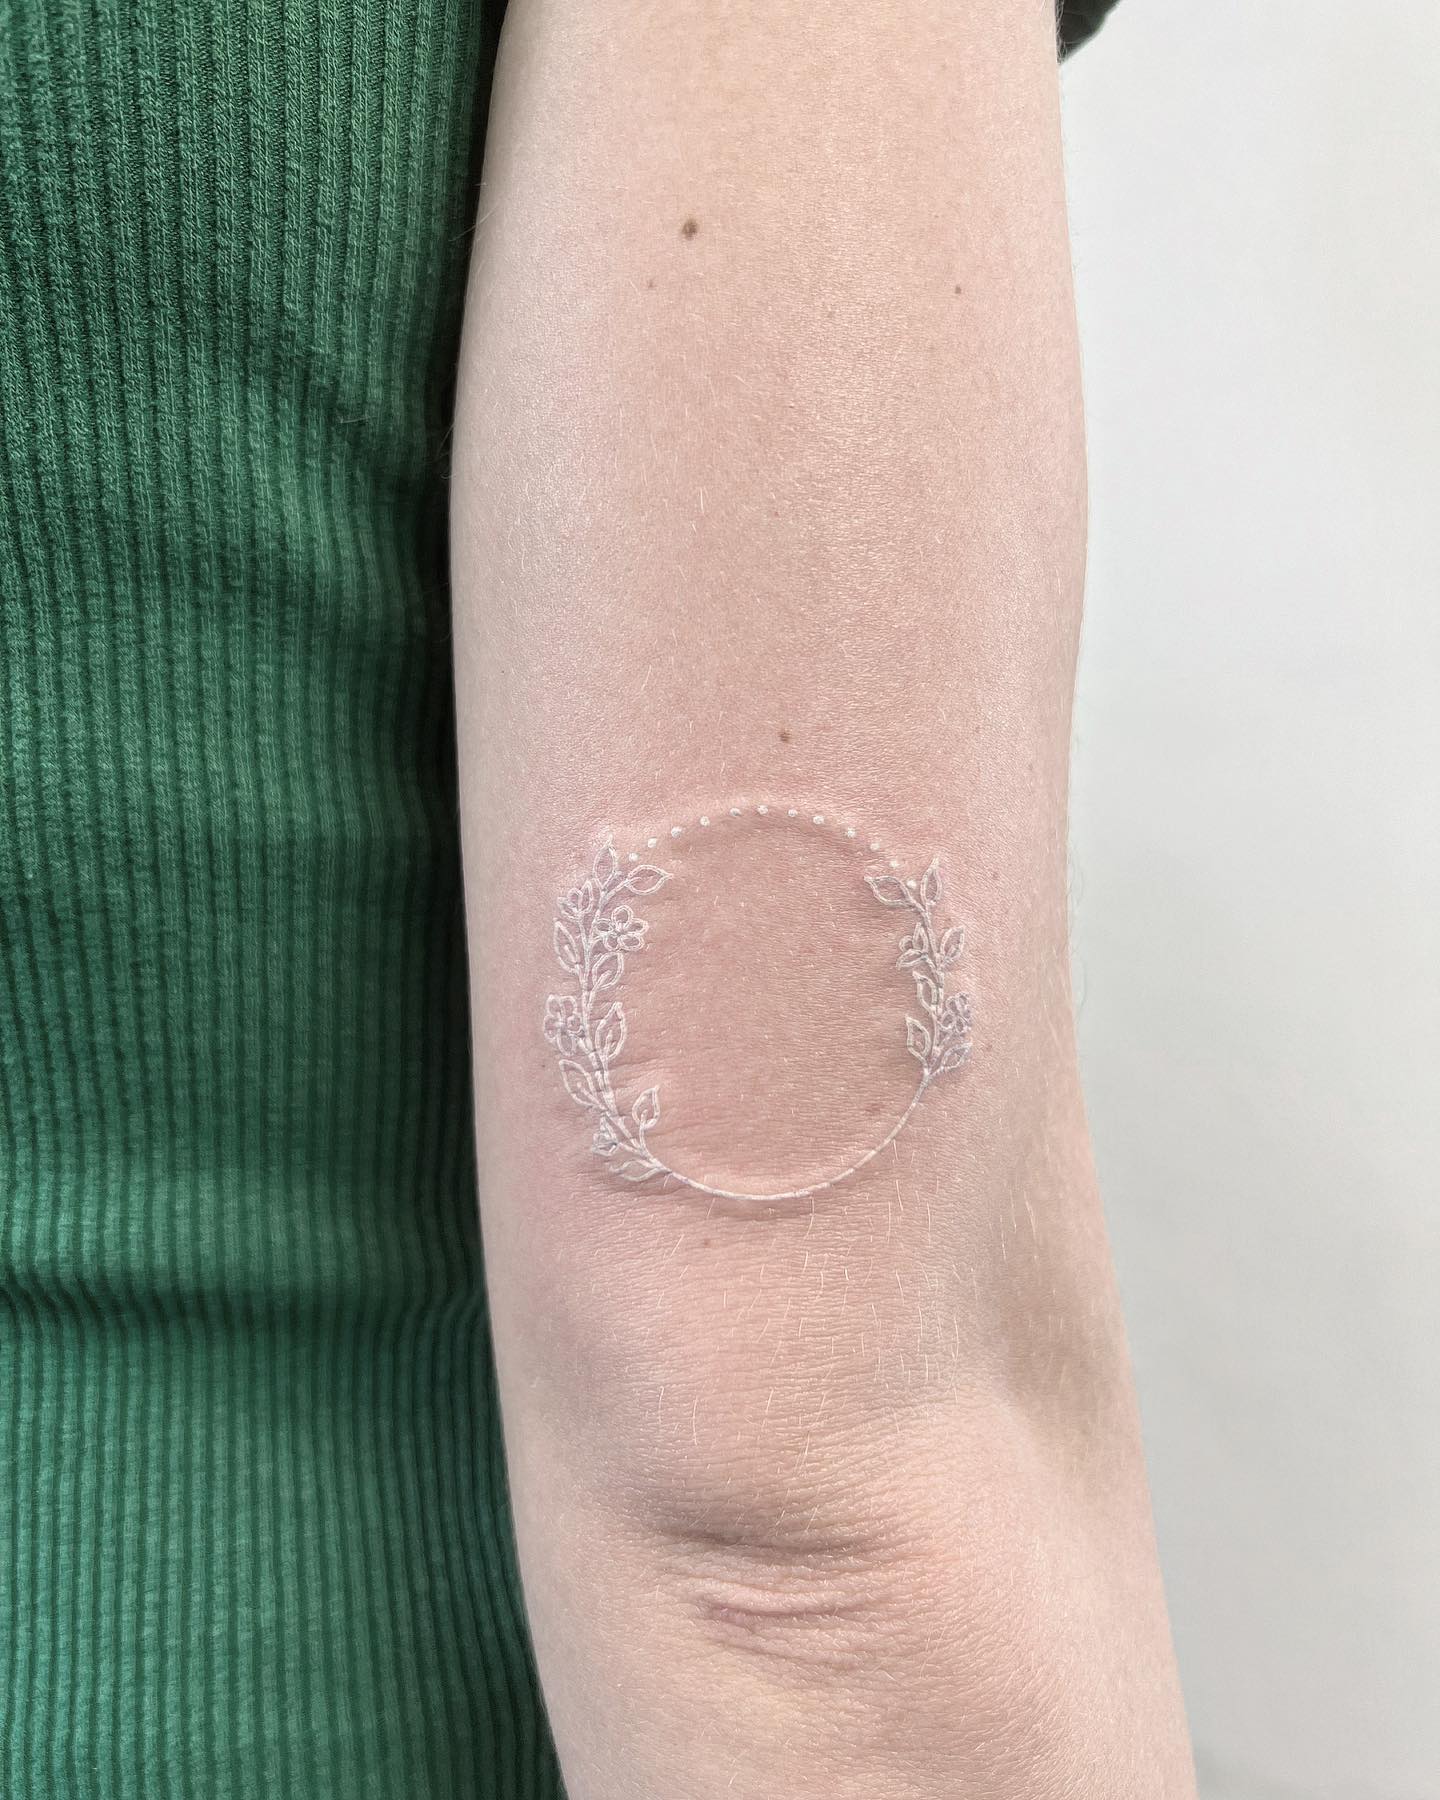 A circular tattoo is a great way to show your love for the earth and all its creatures since the shape represents the world in a way. Flowers surrounding it looks like they add an extra beauty to the tattoo!